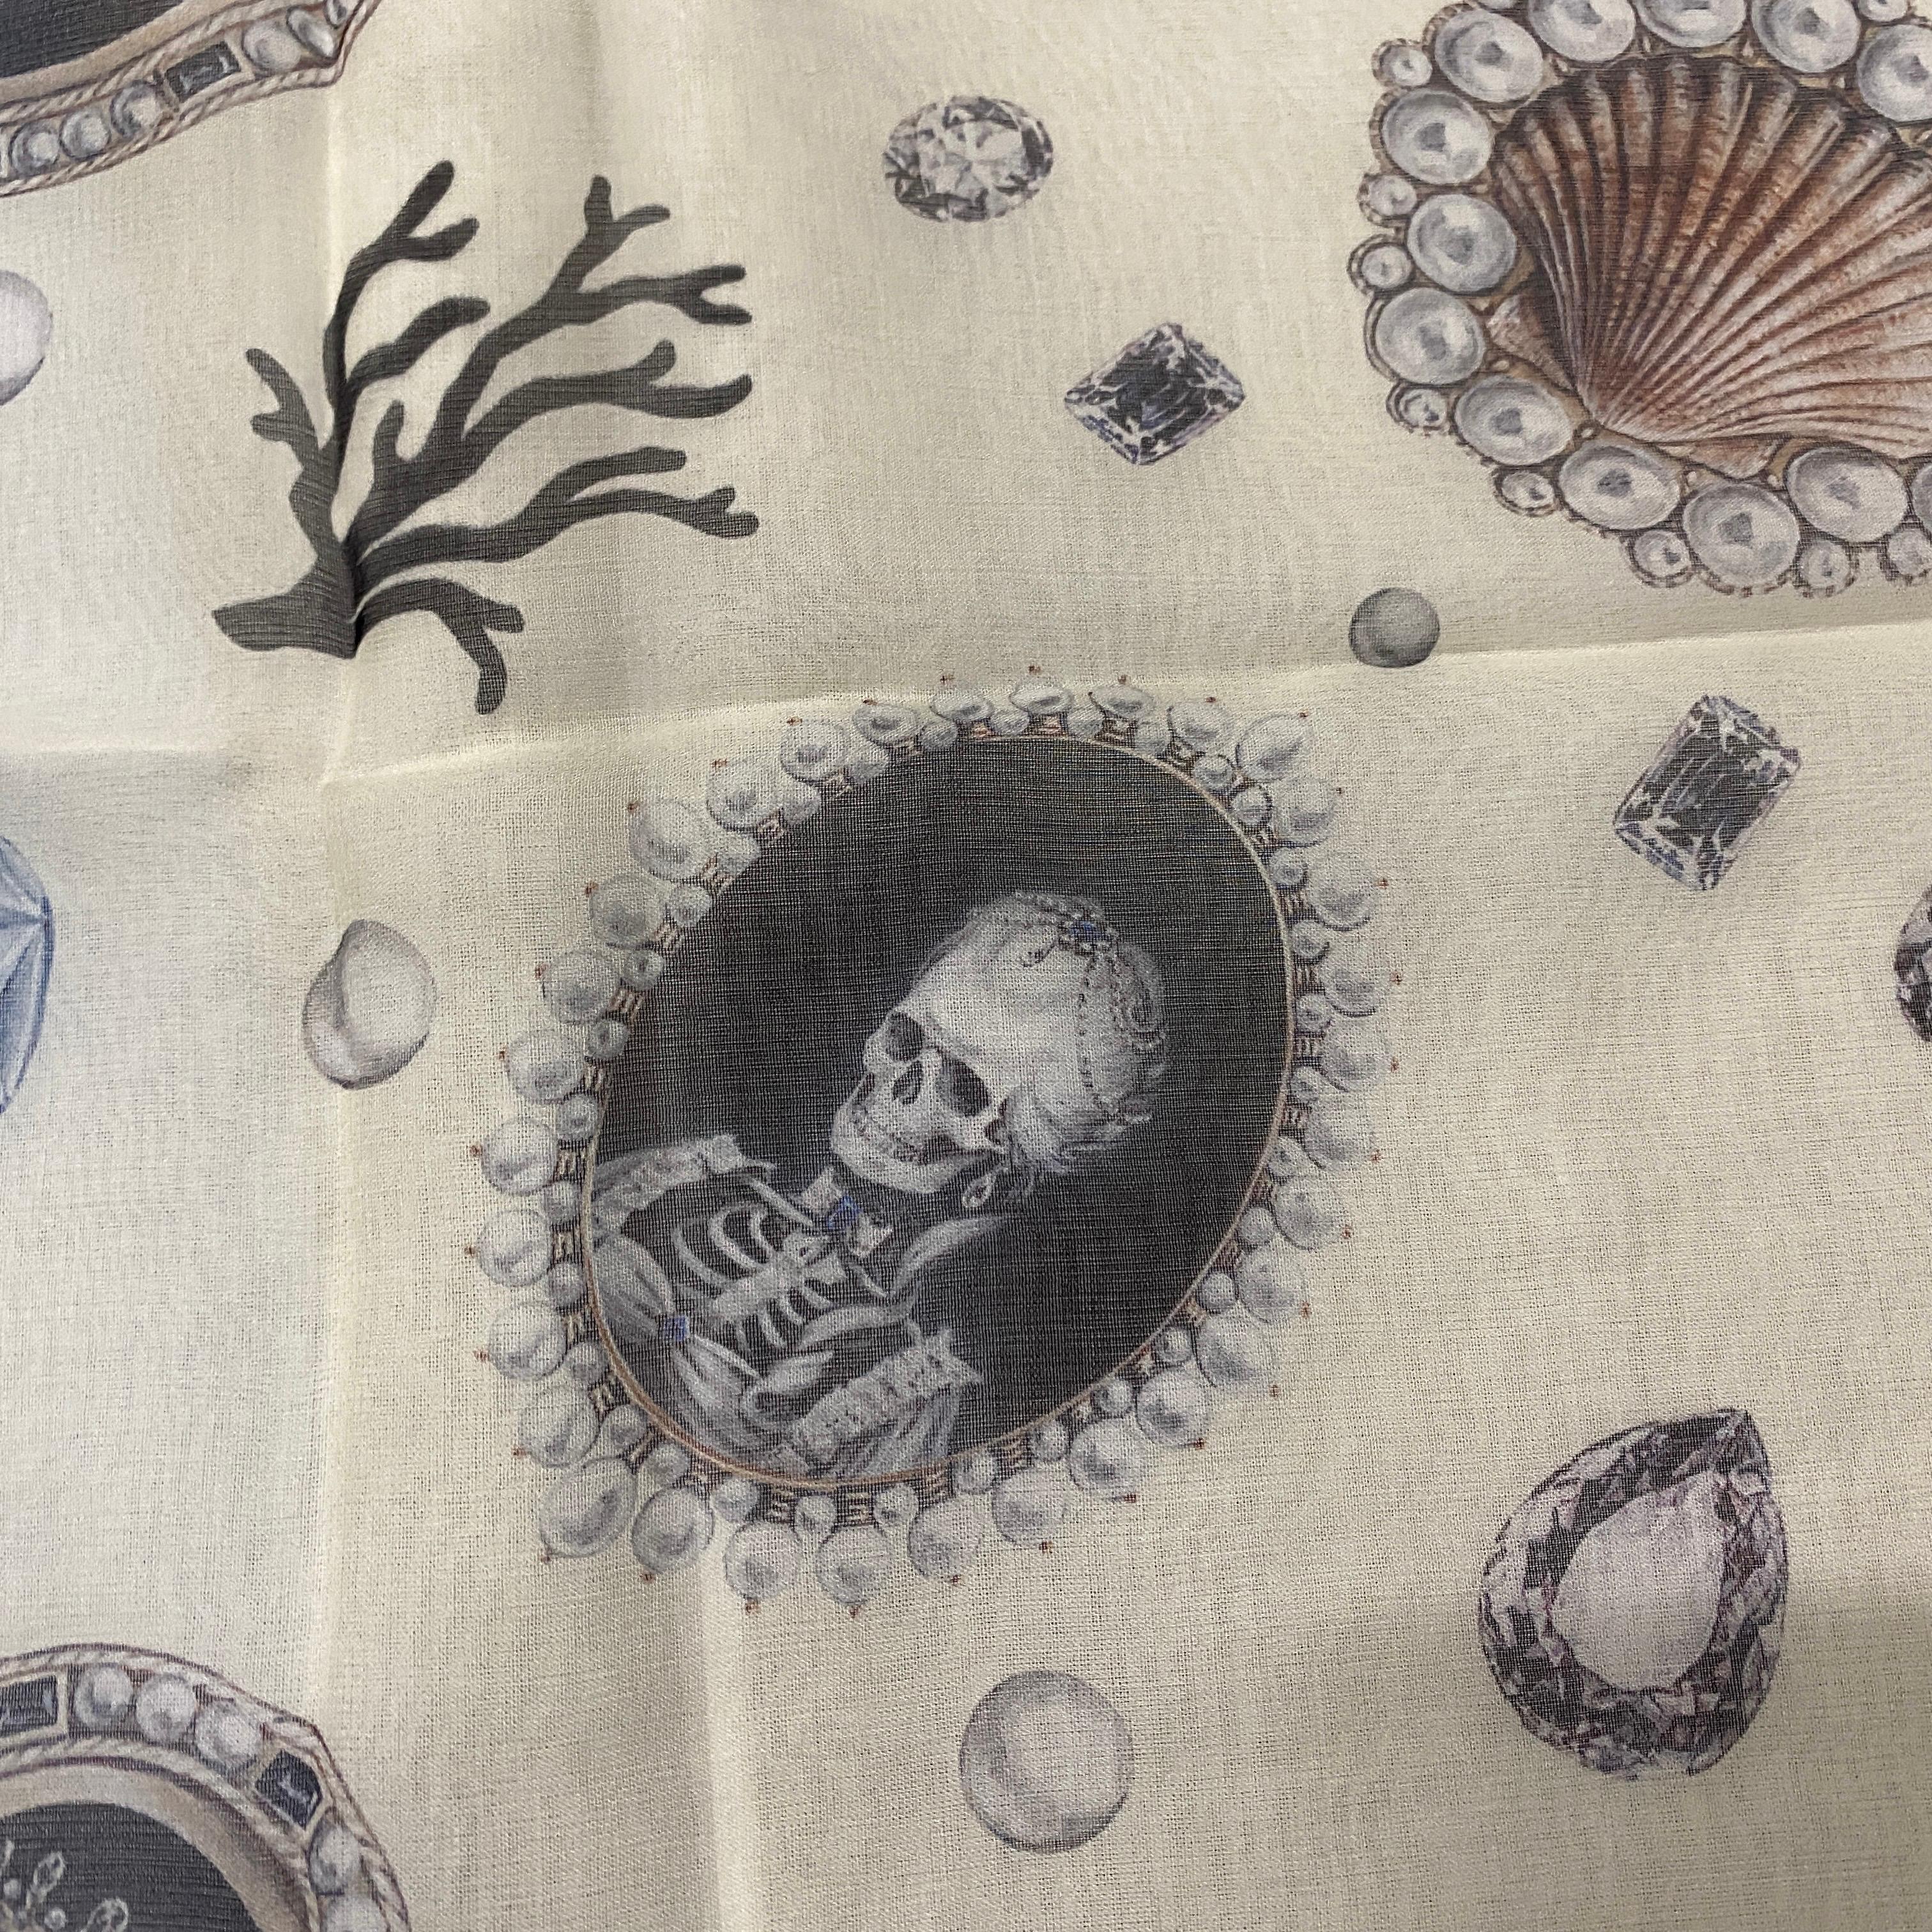 Iconic White Silk Scarf by Alexander McQueen, with central Skull 1